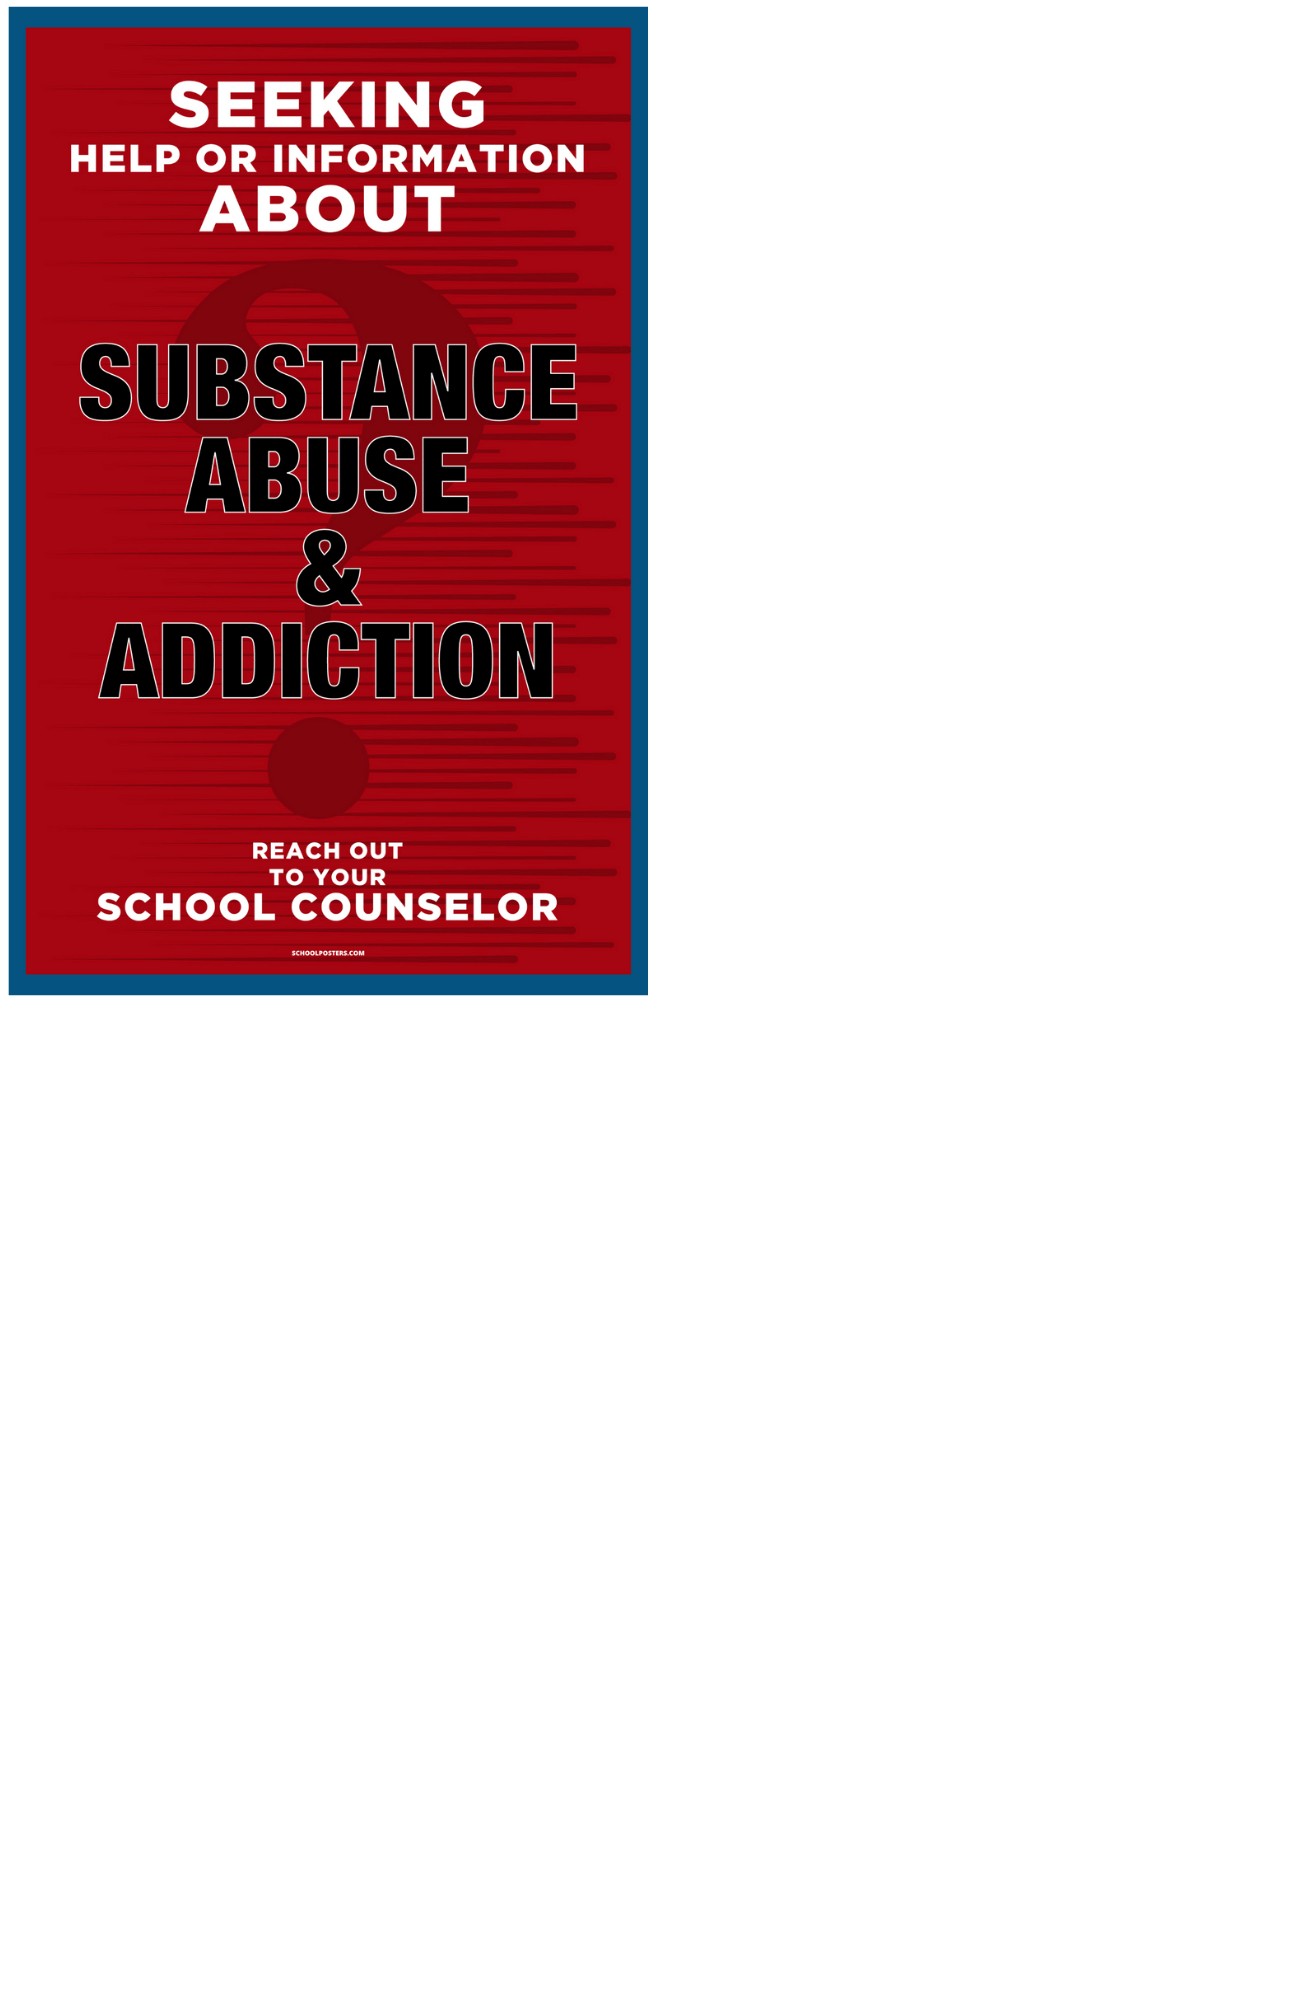 High School Counselor Services Poster Package (Set of 13)